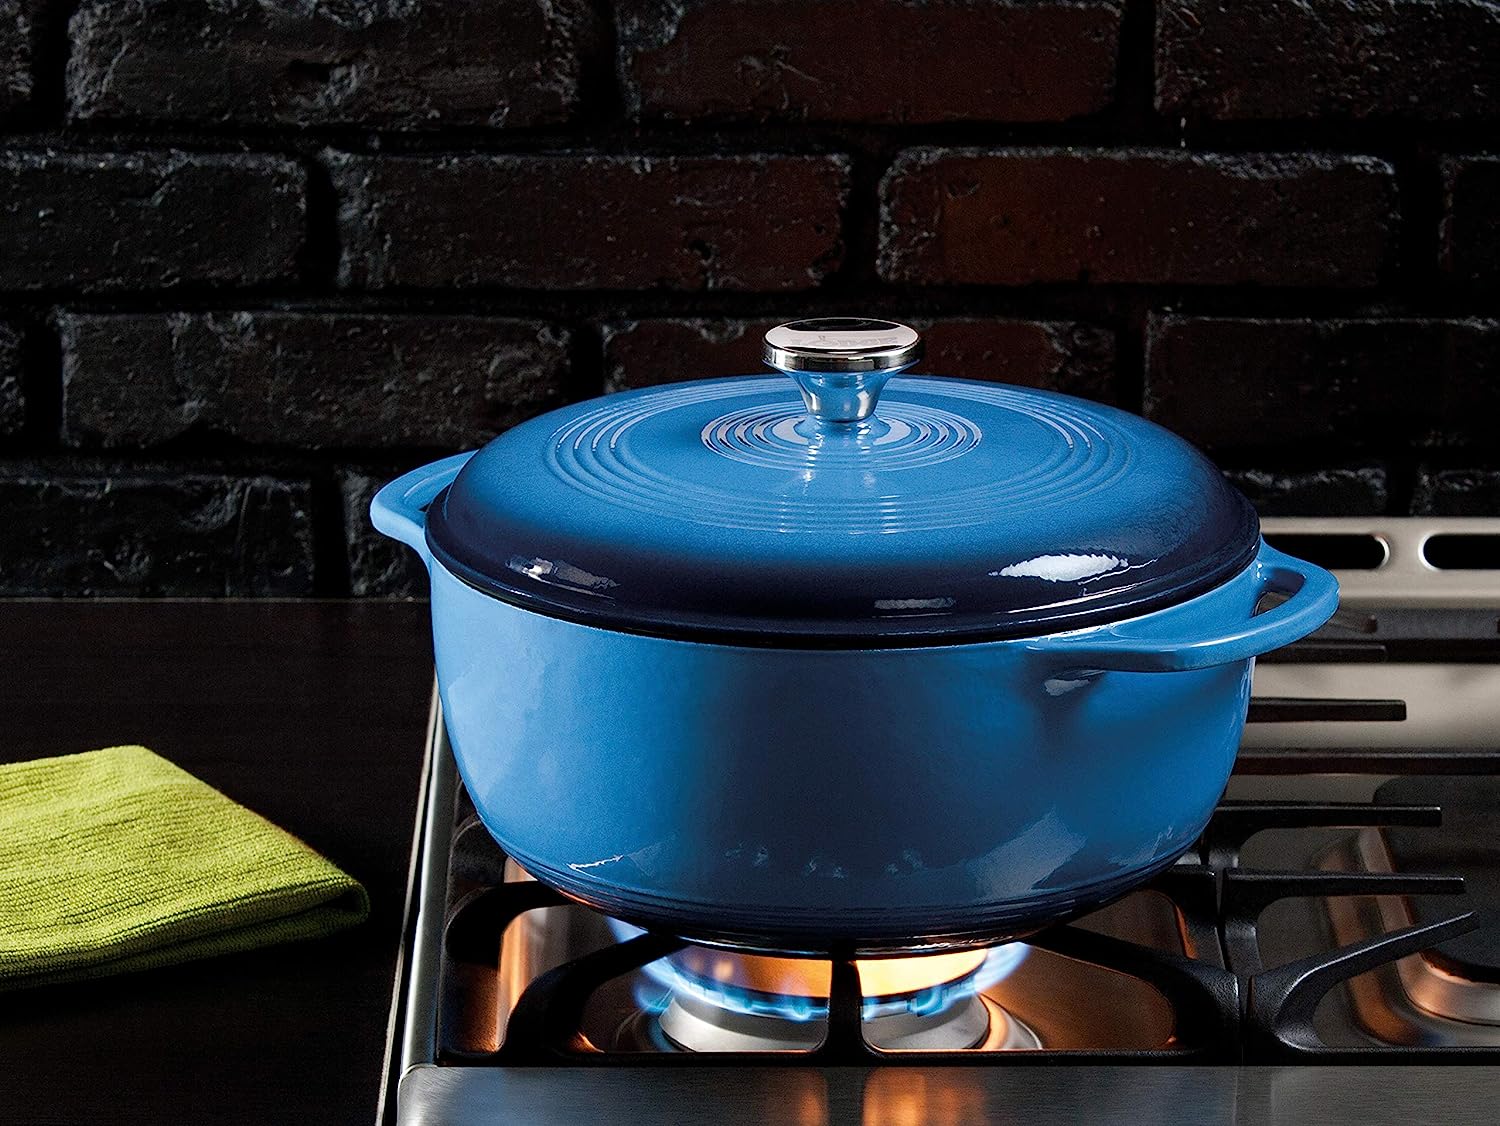 https://bigbigmart.com/wp-content/uploads/2023/07/Lodge-6-Quart-Enameled-Cast-Iron-Dutch-Oven-with-Lid-%E2%80%93-Dual-Handles-%E2%80%93-Oven-Safe-up-to-500%C2%B0-F-or-on-Stovetop-Use-to-Marinate-Cook-Bake-Refrigerate-and-Serve-%E2%80%93-Blue1.jpg